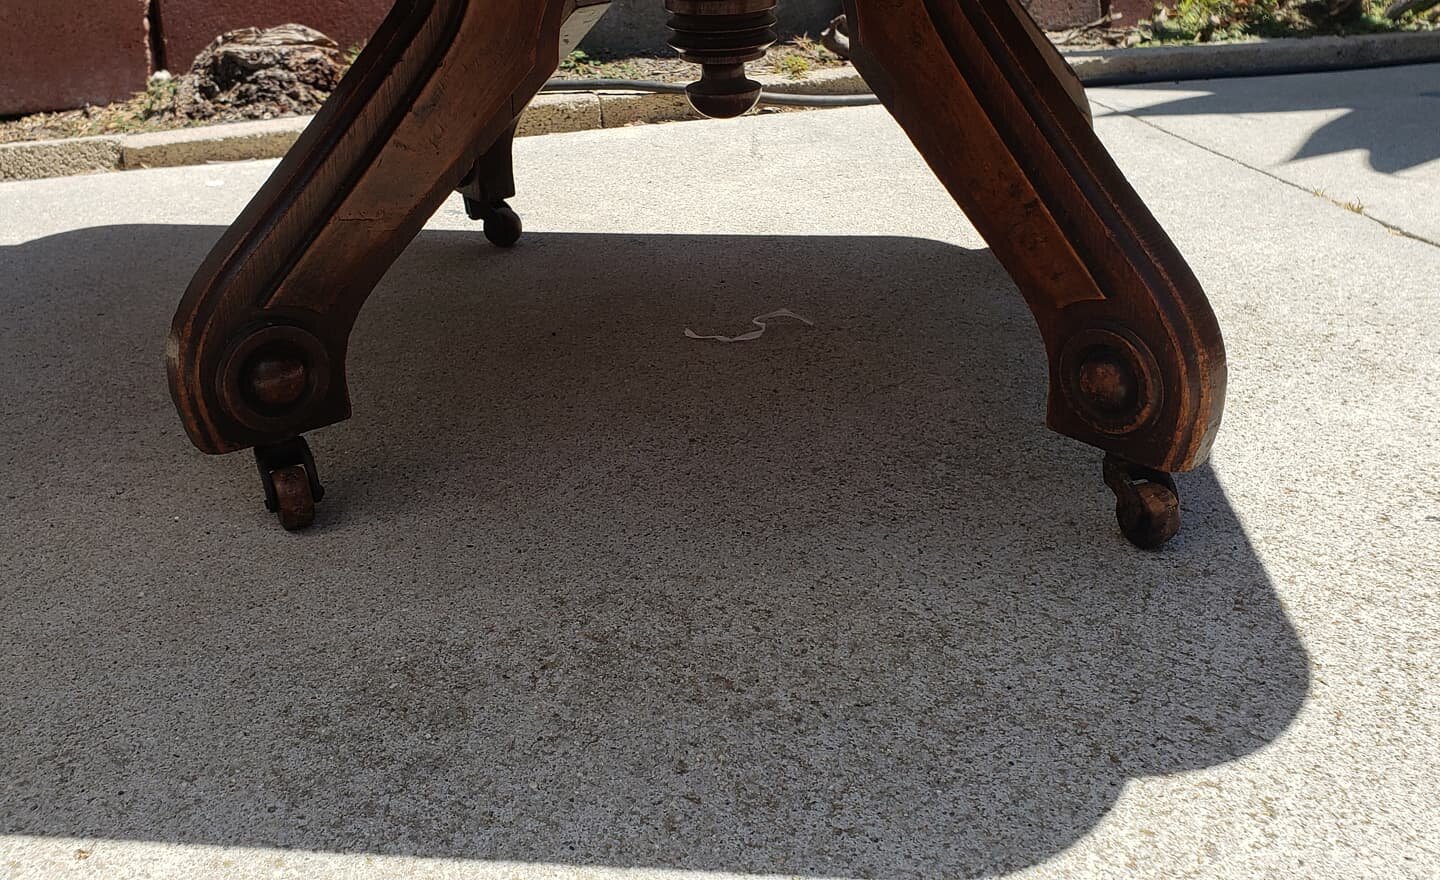 $195. Antique stone marble top wood table with wood casters / wheels. Works great. 32&quot; wide 24&quot; deep 17&quot; tall. Coffee side end table
Plus tax.
This item is located in my Antique Mall booth in the city or Orange. Text Message (don't cal